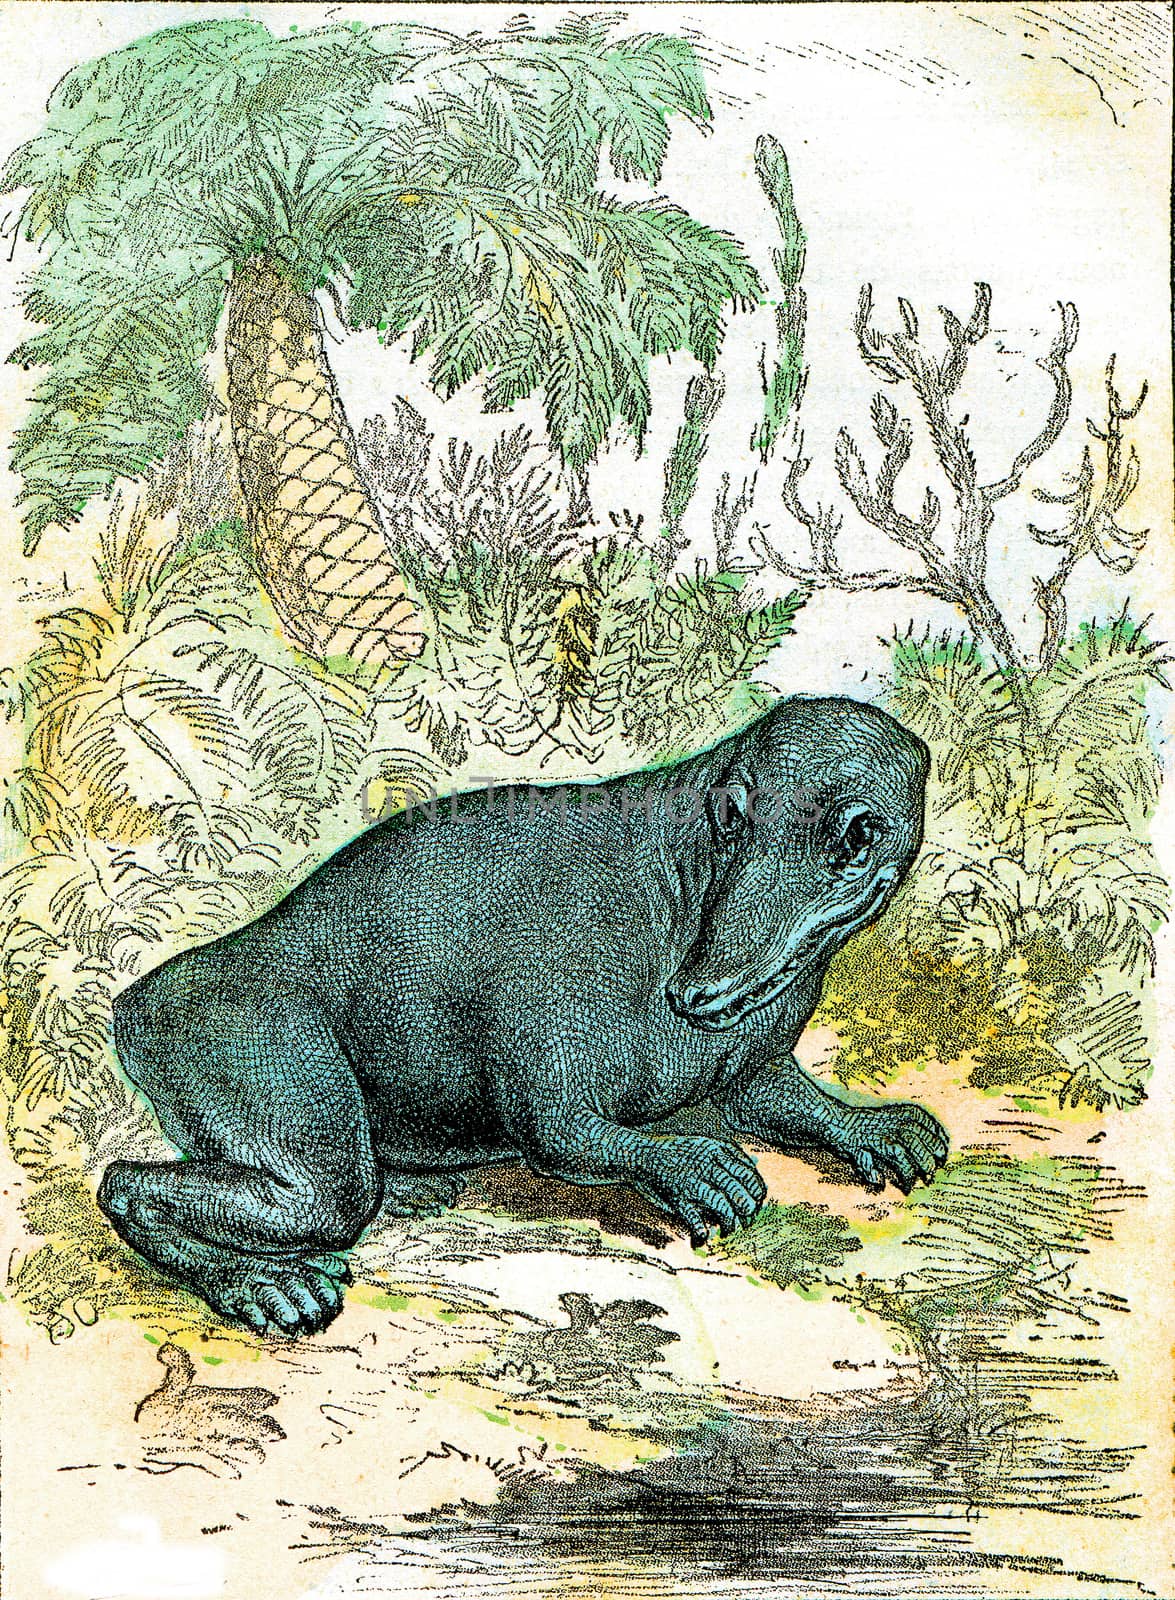 The Labyrinthodon of the Coal Period, vintage engraved illustration. From Natural Creation and Living Beings.
